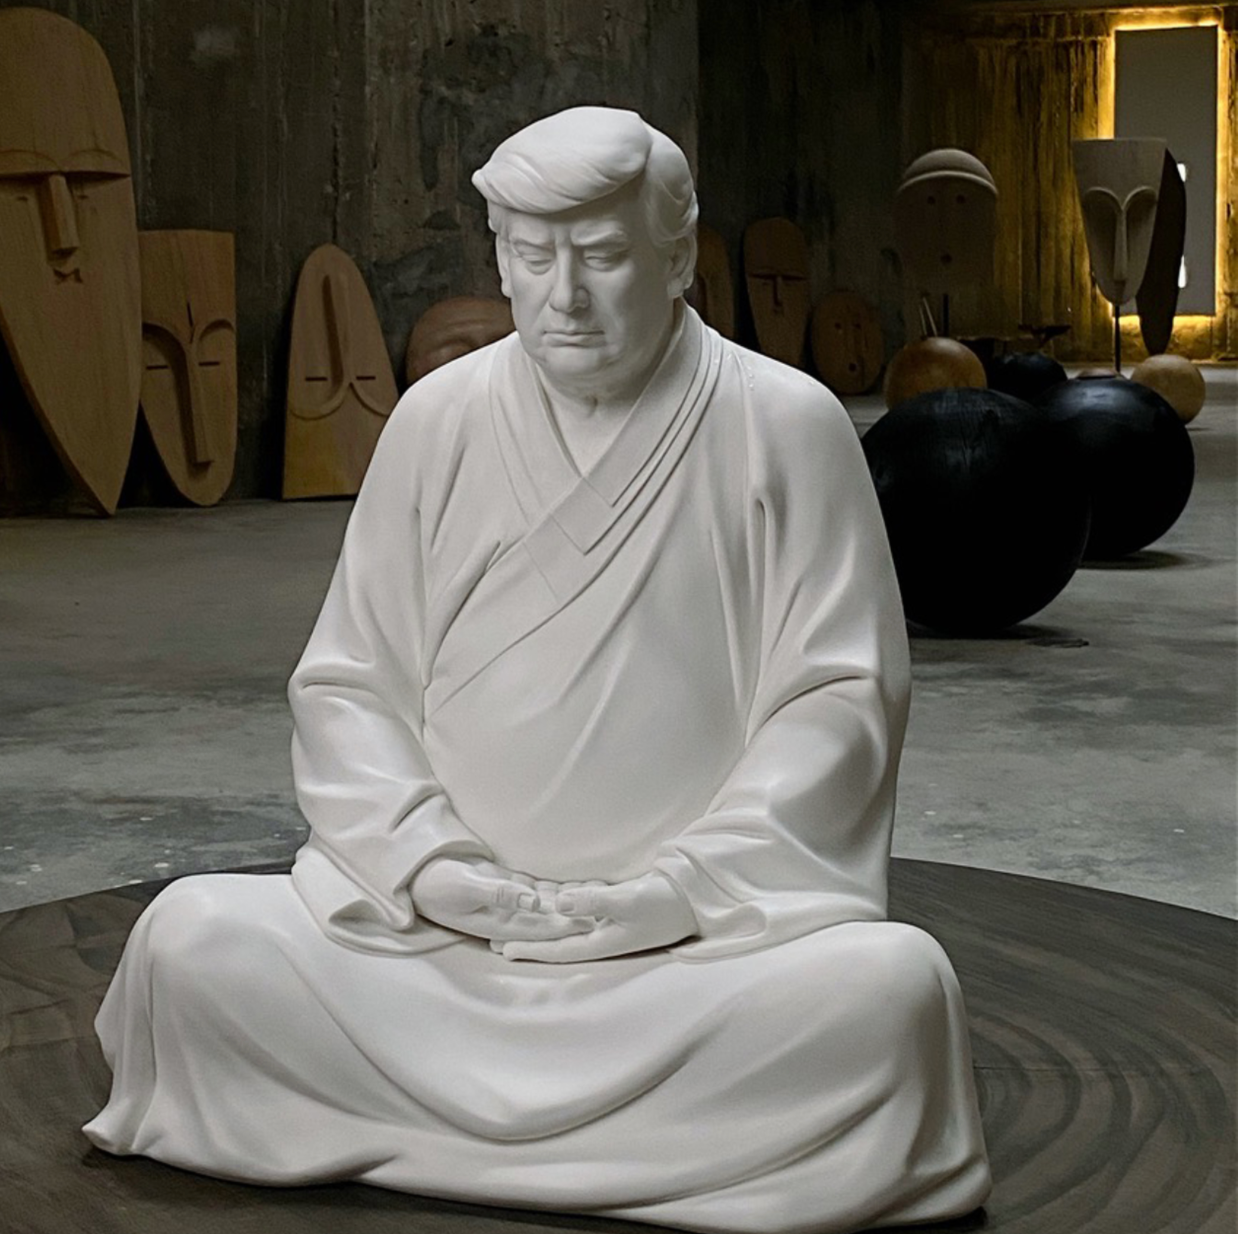 A white porcelain statue of Donald Trump posed like the Buddha is available on the Chinese shopping website Taobao